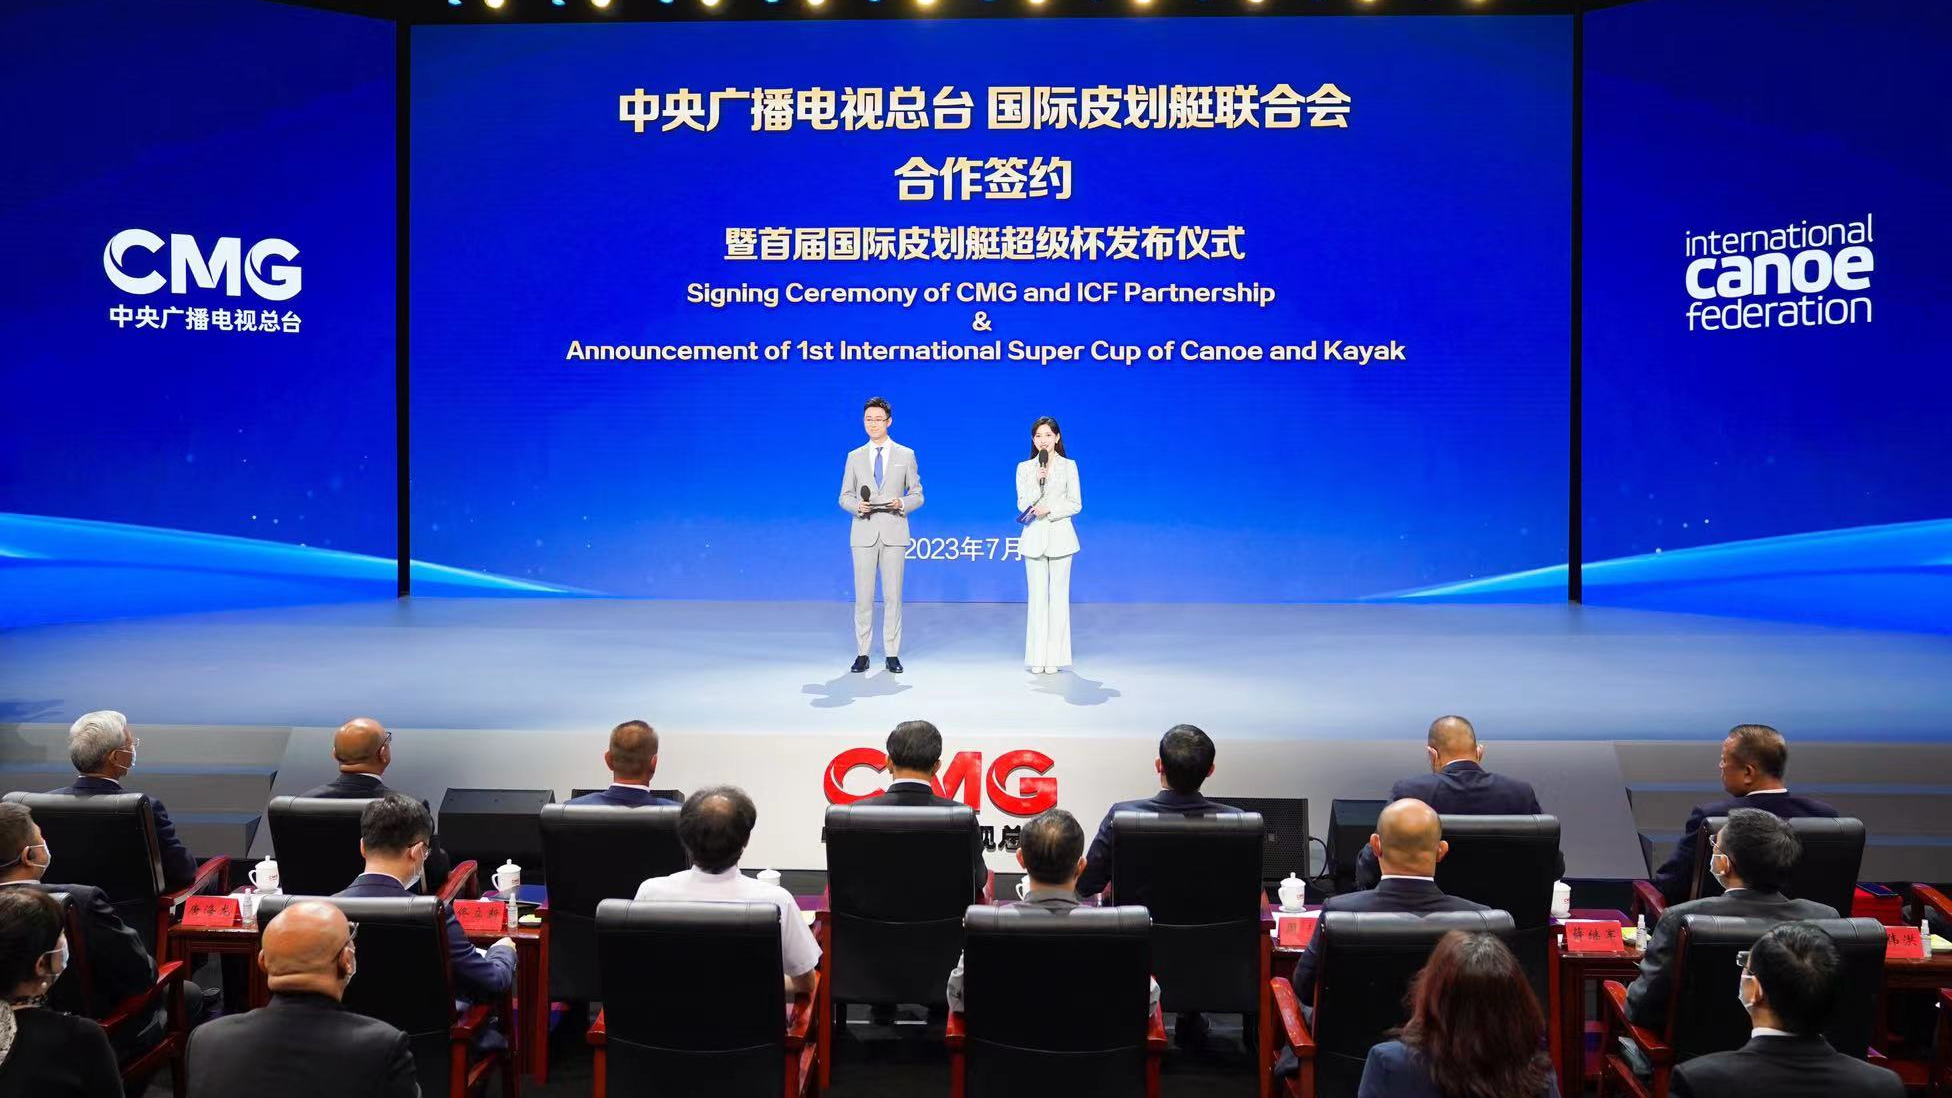 The signing ceremony of CMG and ICF partnership and announcement of the 1st International Super Cup of Canoe and Kayak in Beijing, China, July 5, 2023. /CFP